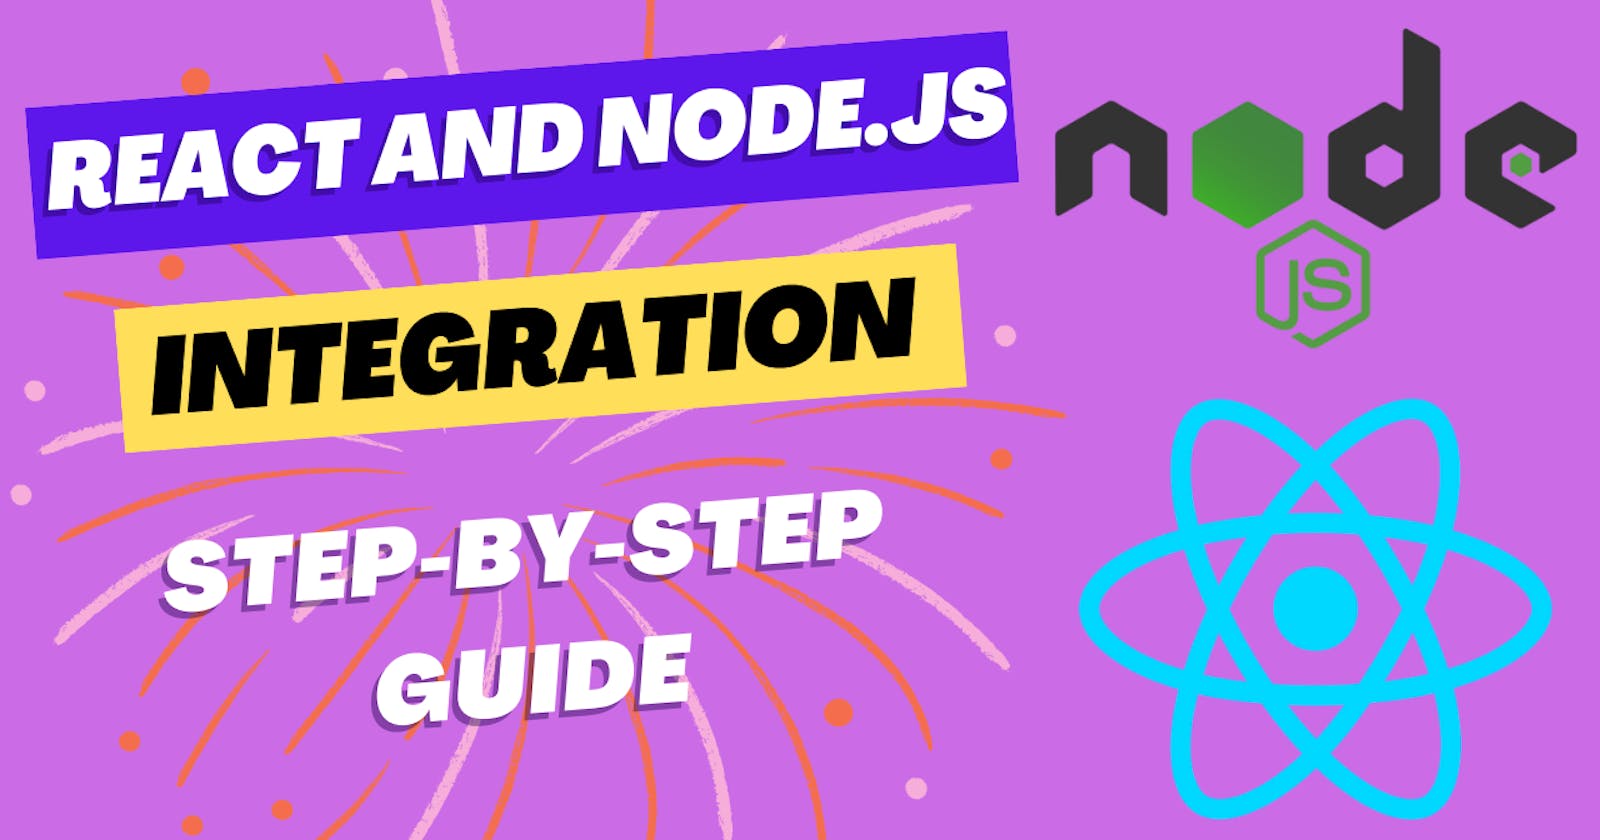 React And Node.js Integration: Step By Step Guide - A New Youtube Video